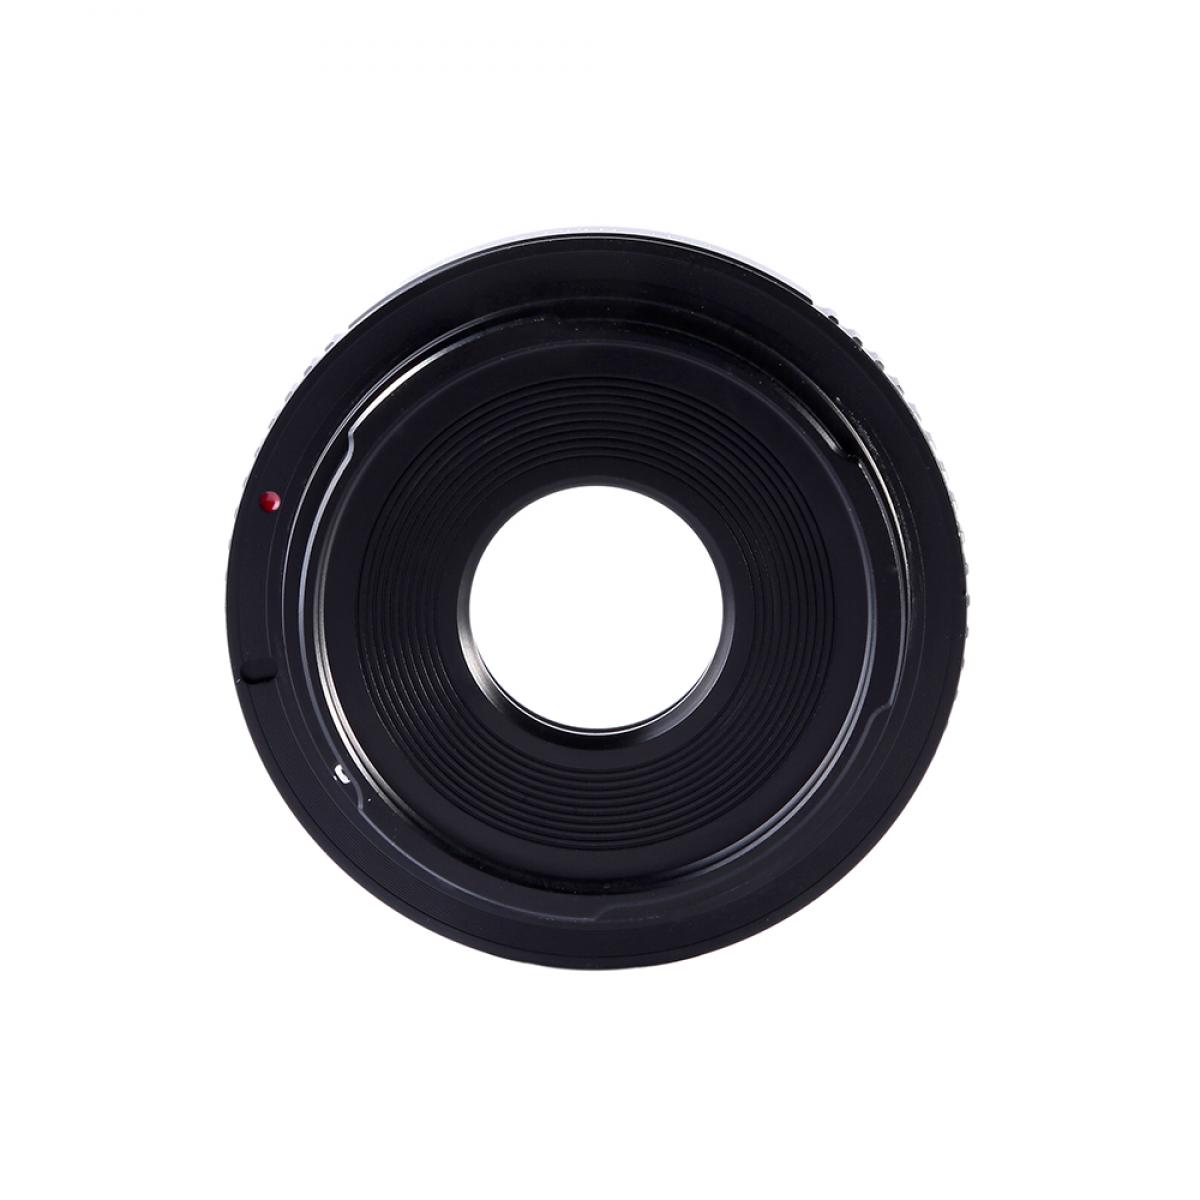 M13131 Canon Fd Lenses To Canon Eos Ef Lens Mount Adapter With Optic